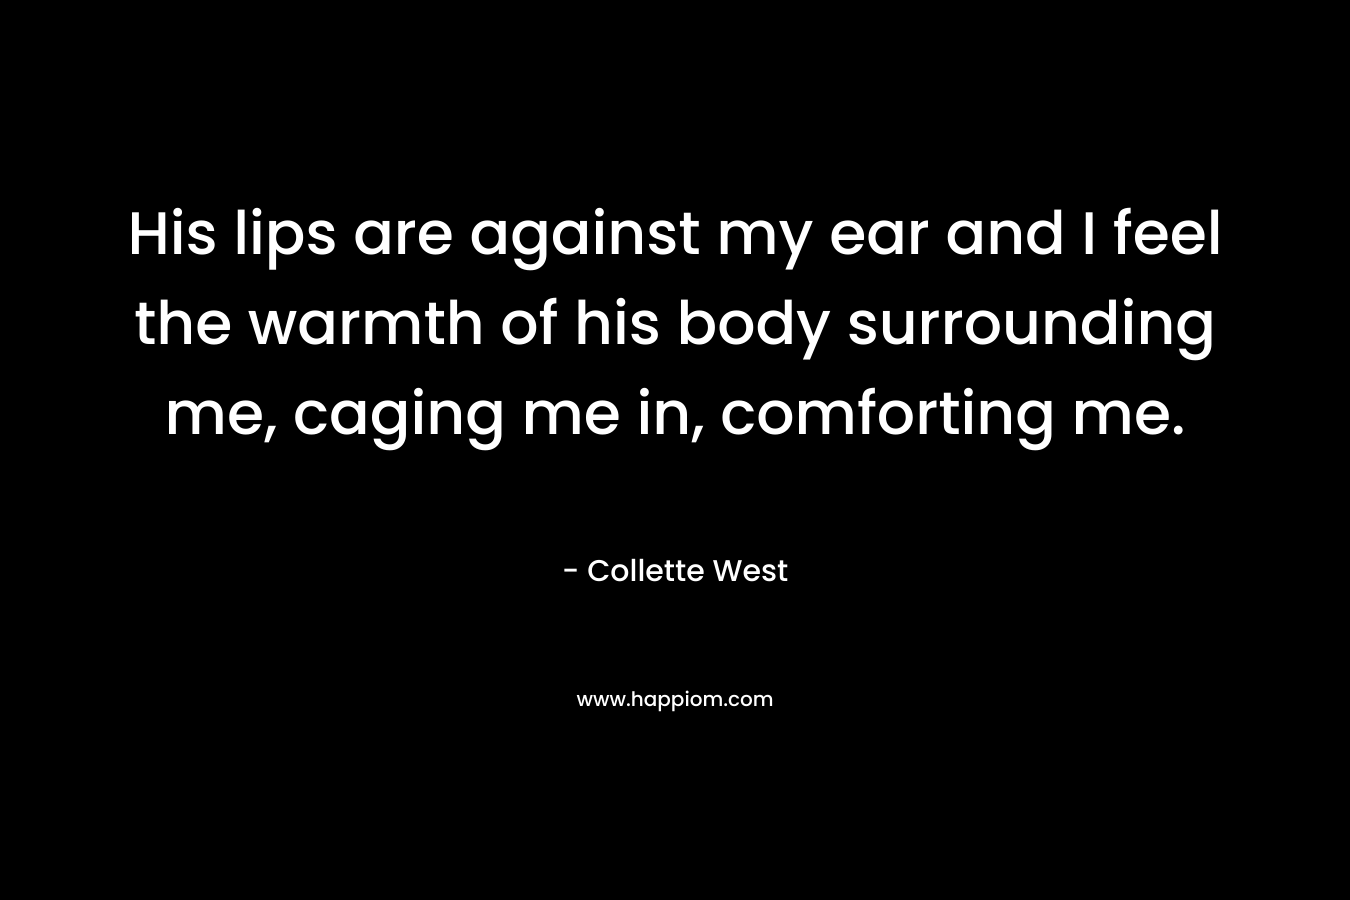 His lips are against my ear and I feel the warmth of his body surrounding me, caging me in, comforting me. – Collette West